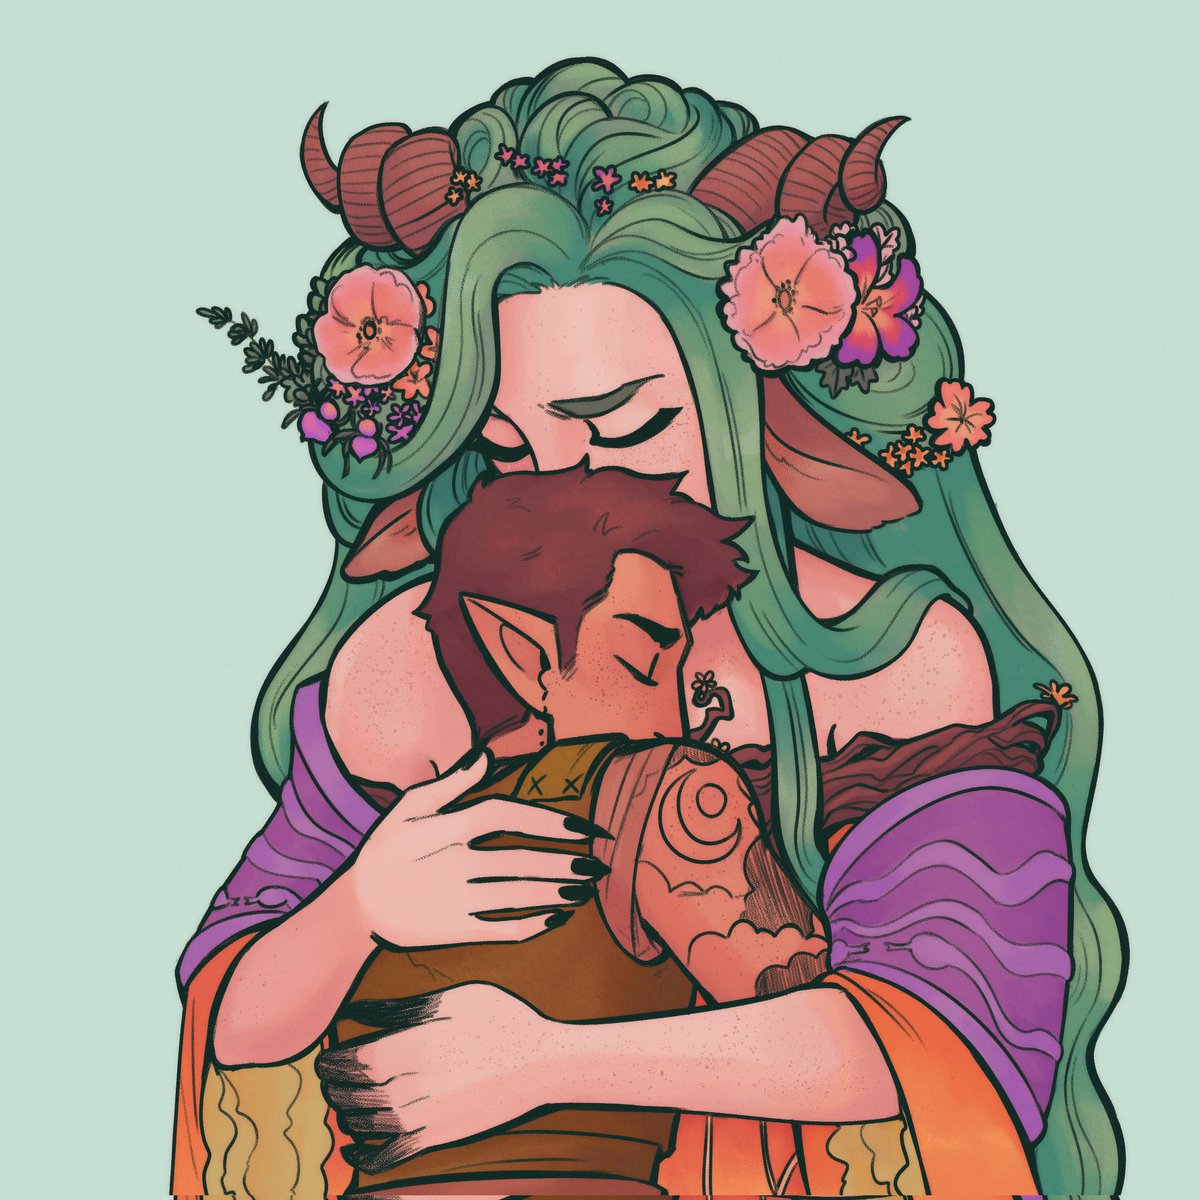 Their reunion is imminent!!! #CriticalRoleSpoilers #CriticalRole #CriticalRoleFanart